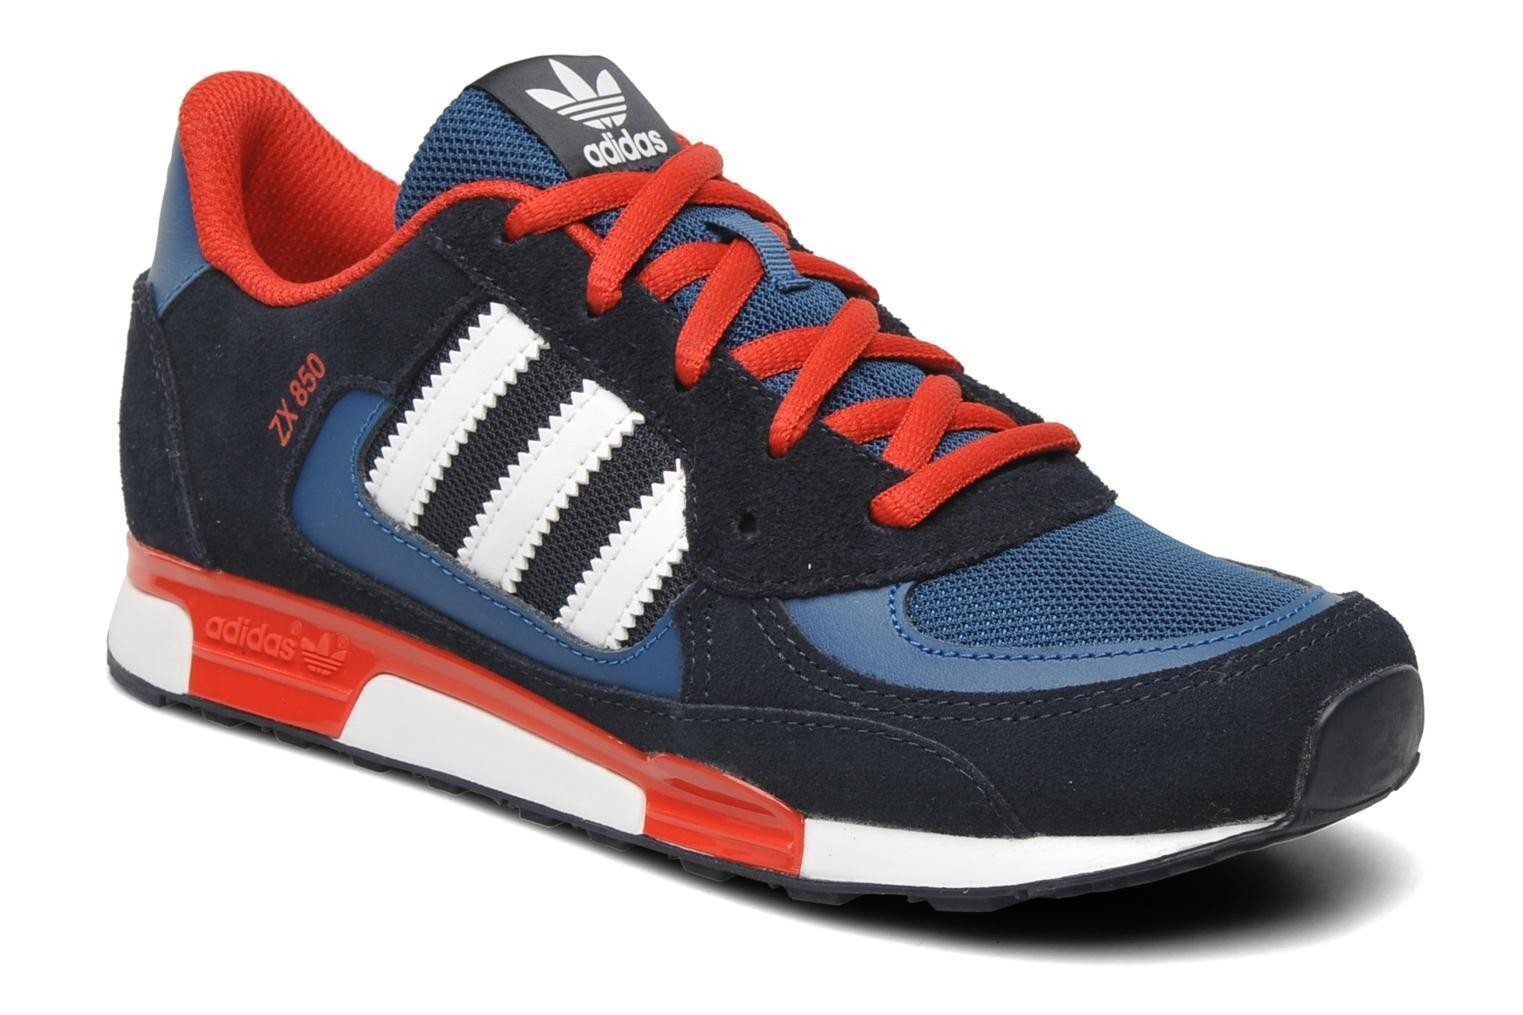 adidas zx 850 homme